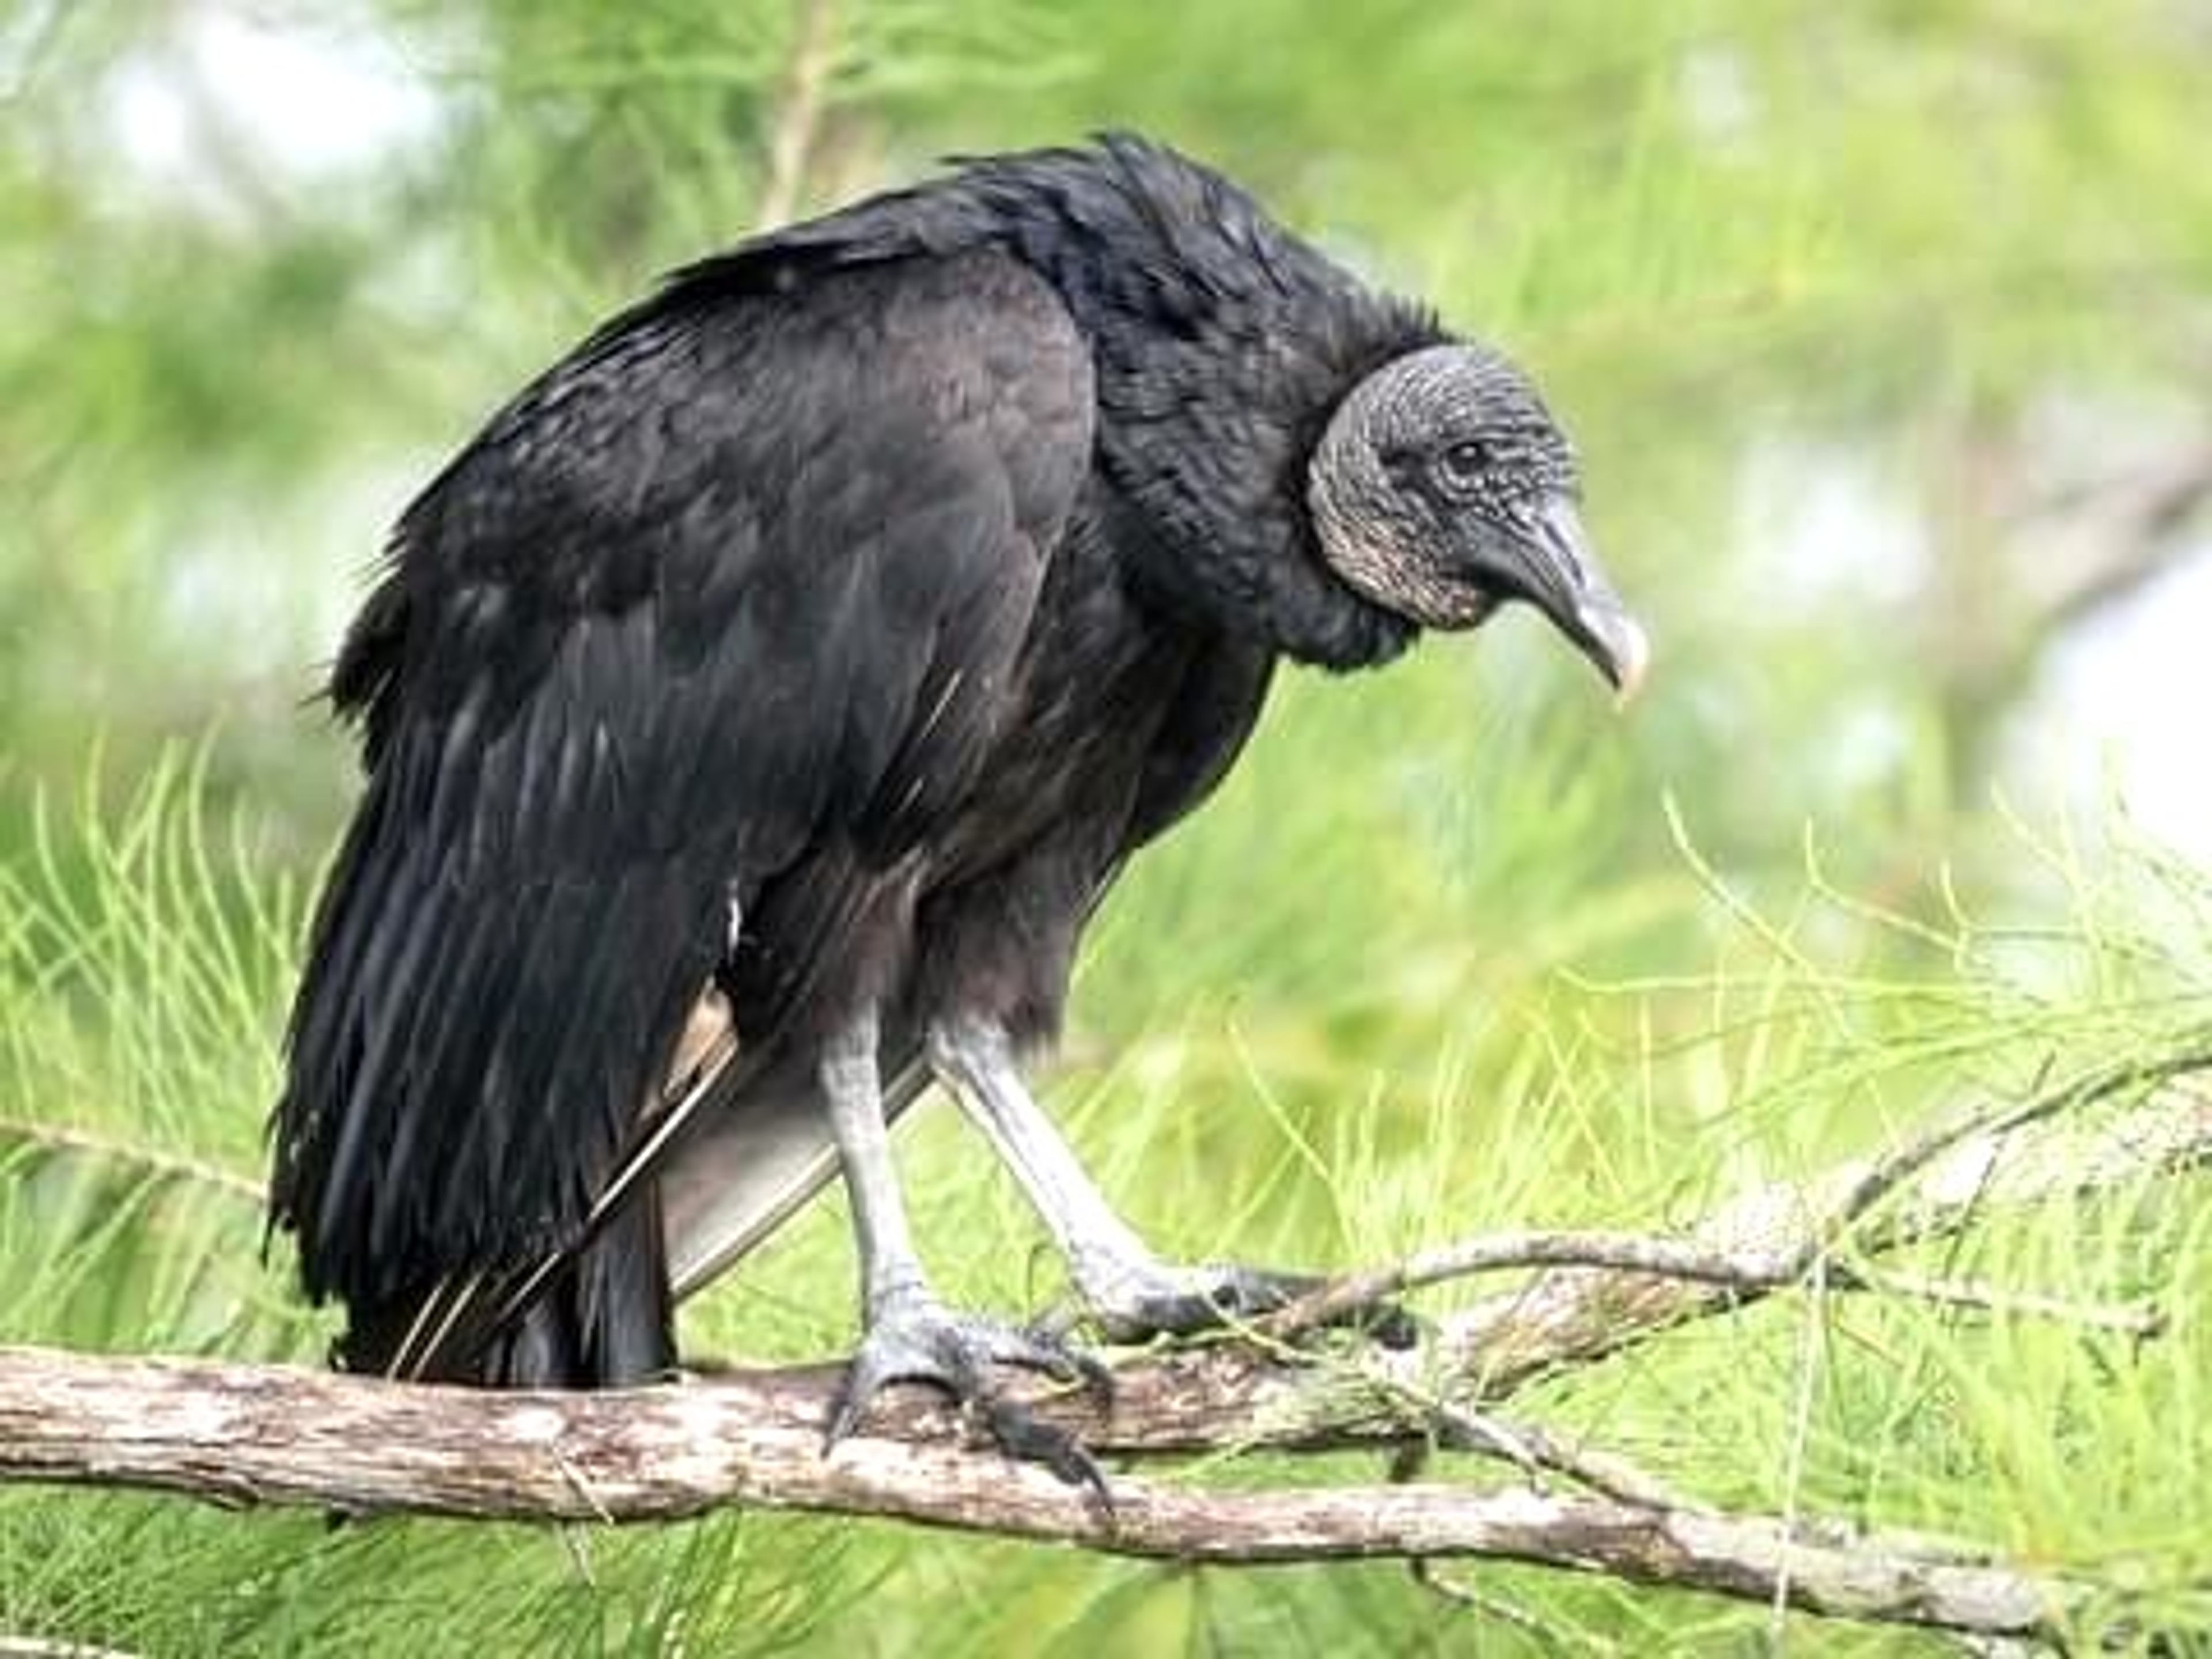 
In an effort to track black vultures and test management tools, 89 black vultures near the Missouri-Arkansas border were captured this spring.
